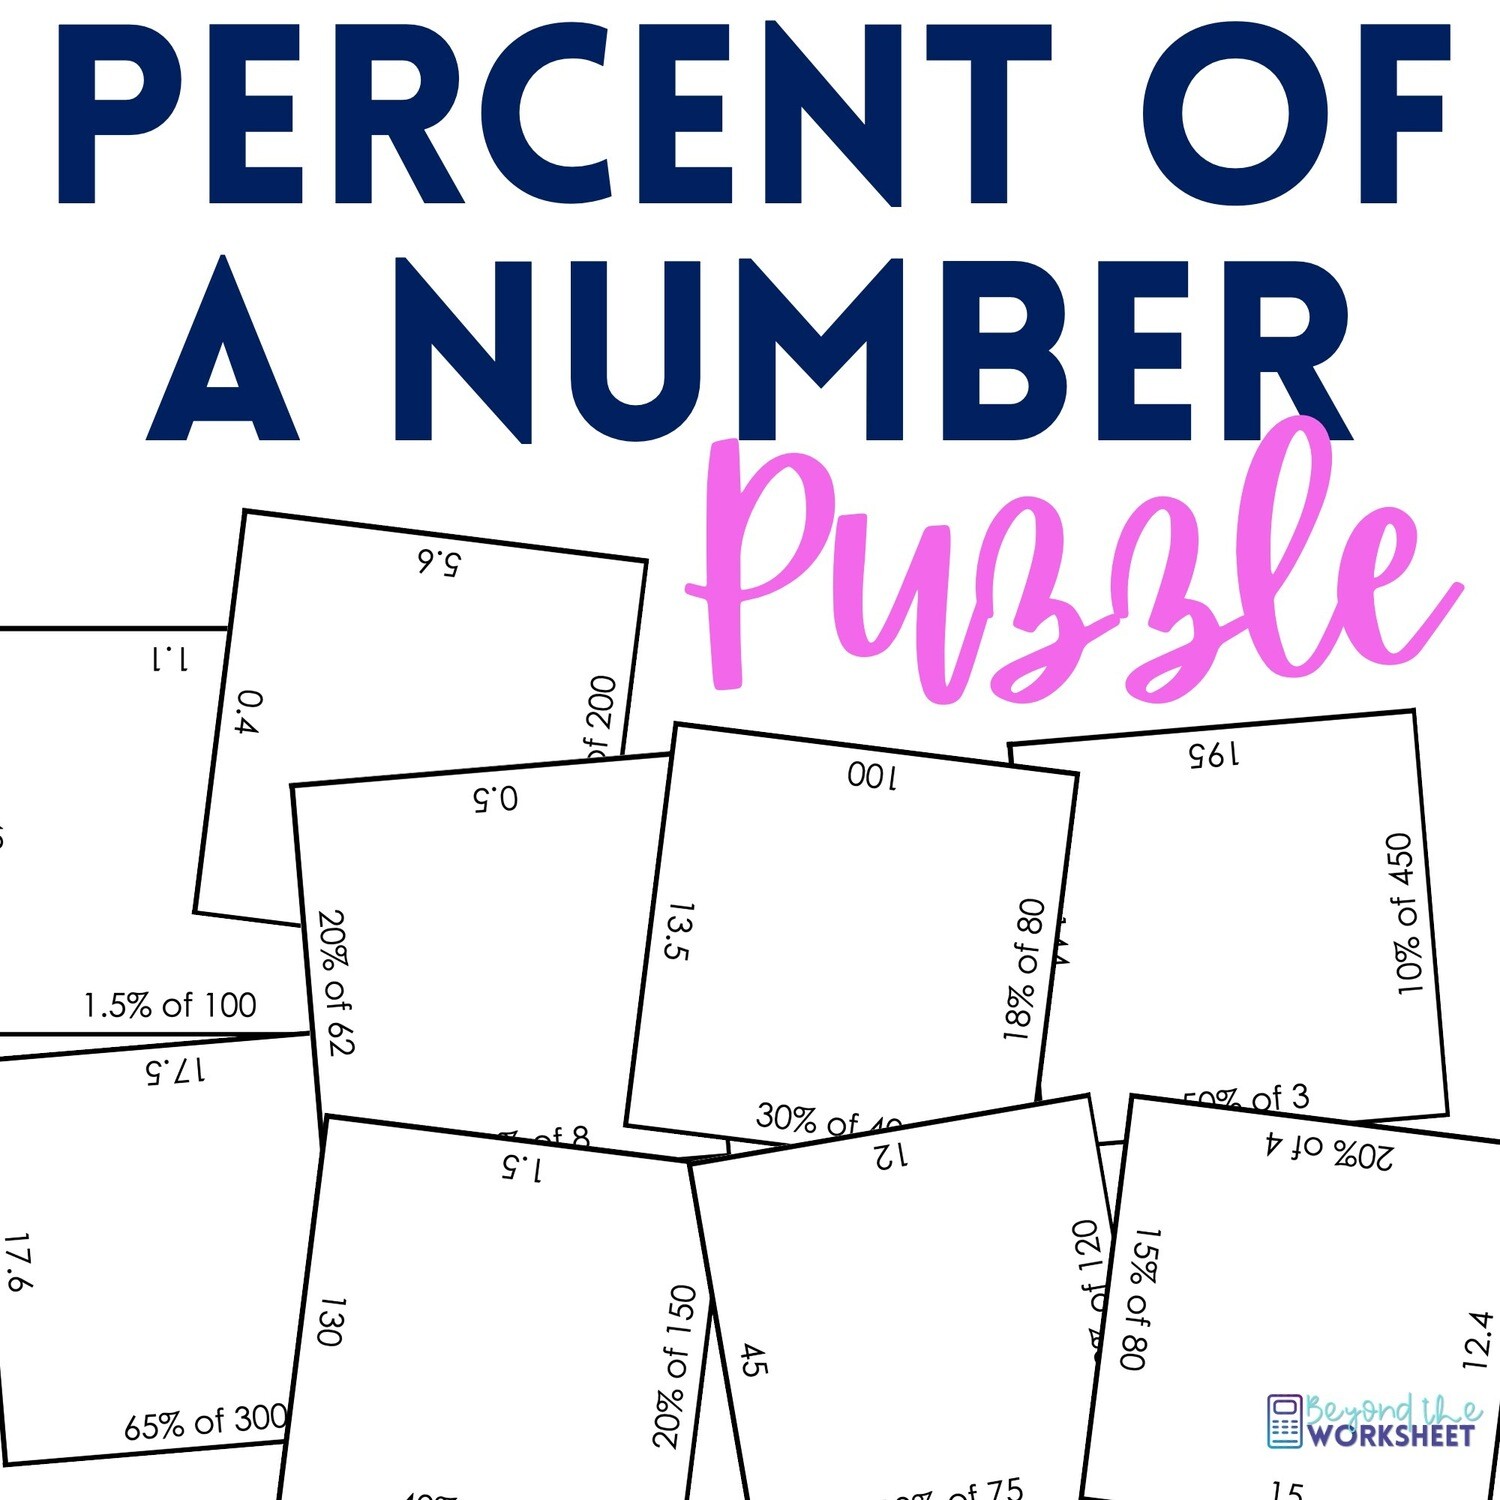 Percent of a Number Puzzle